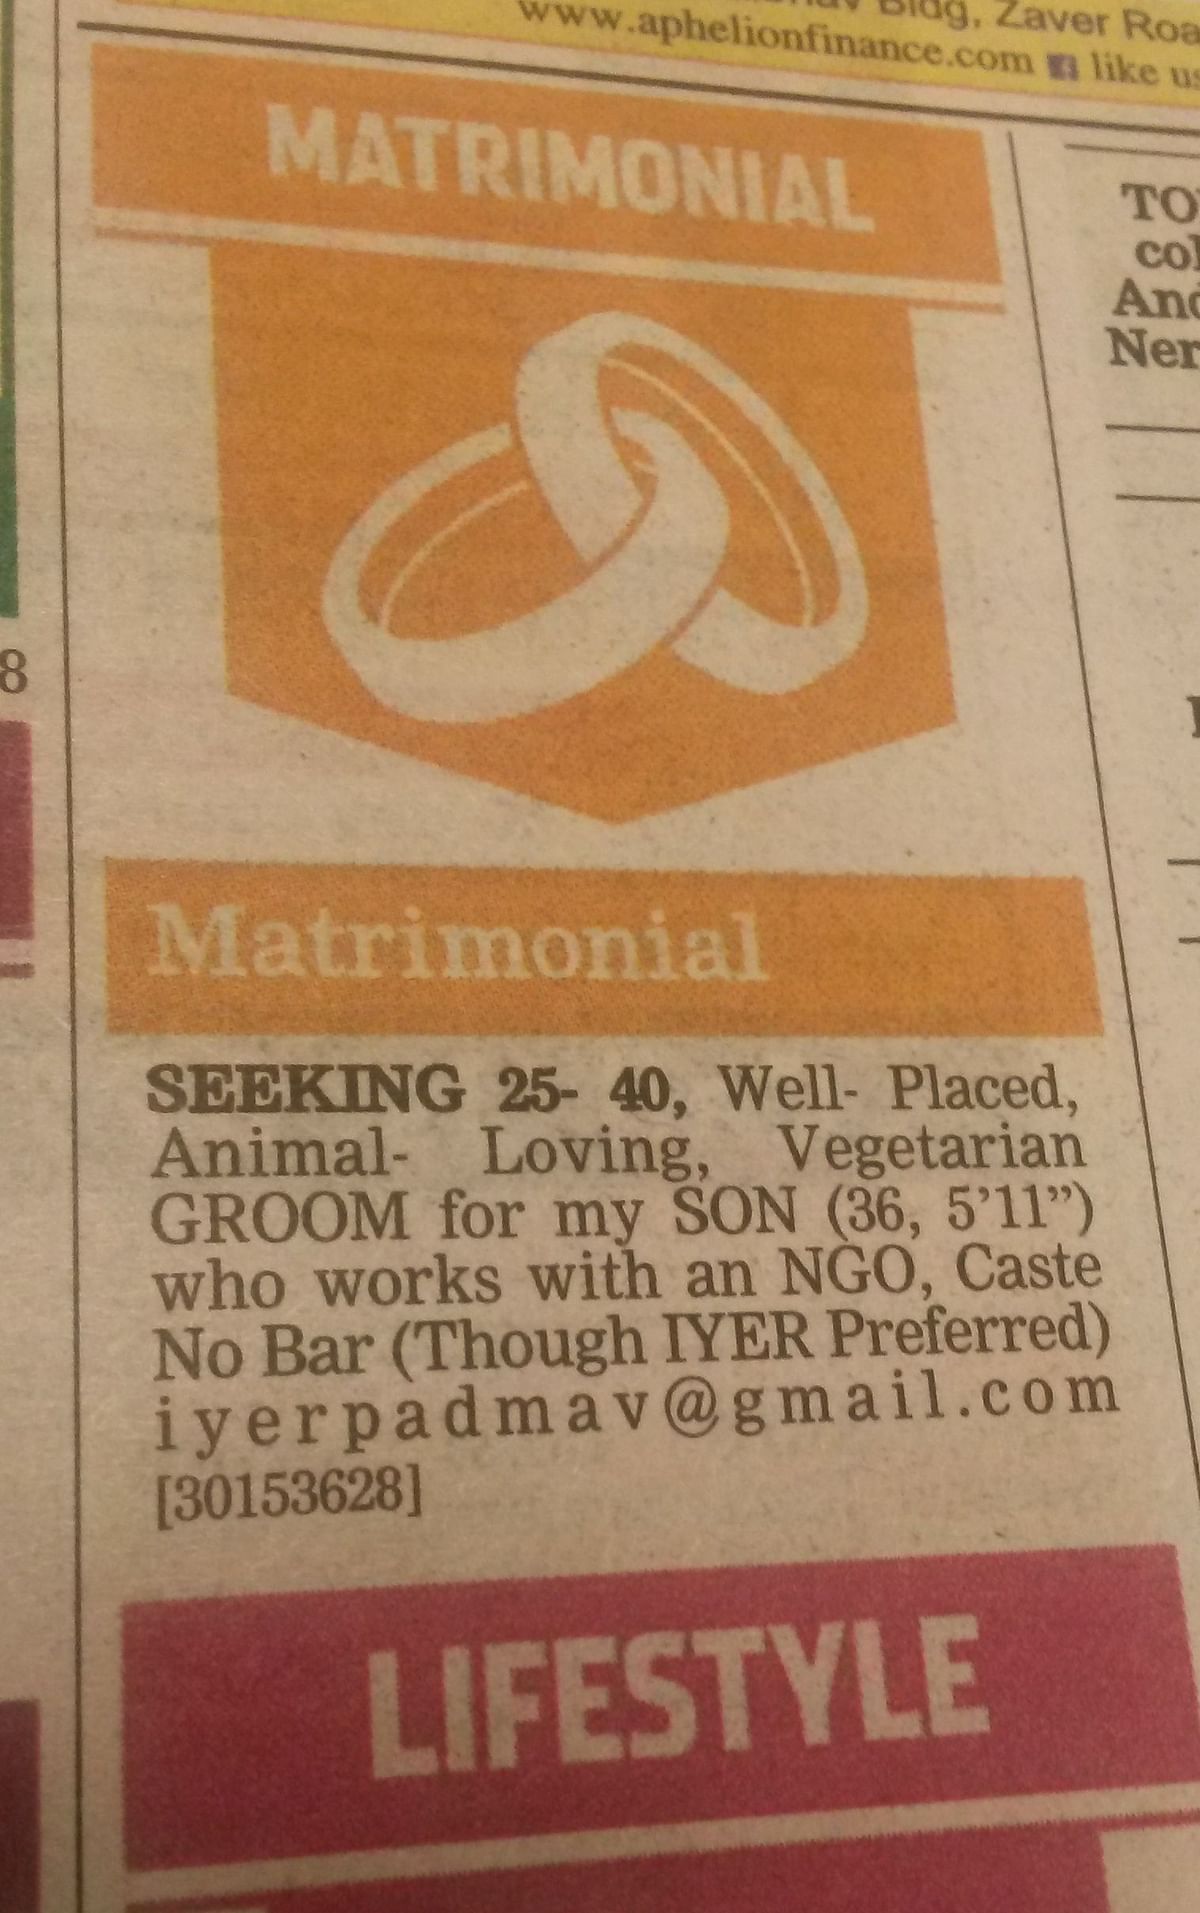 This matrimonial ad was rejected by almost every newspaper citing ‘legal problems’. A case of double standards?